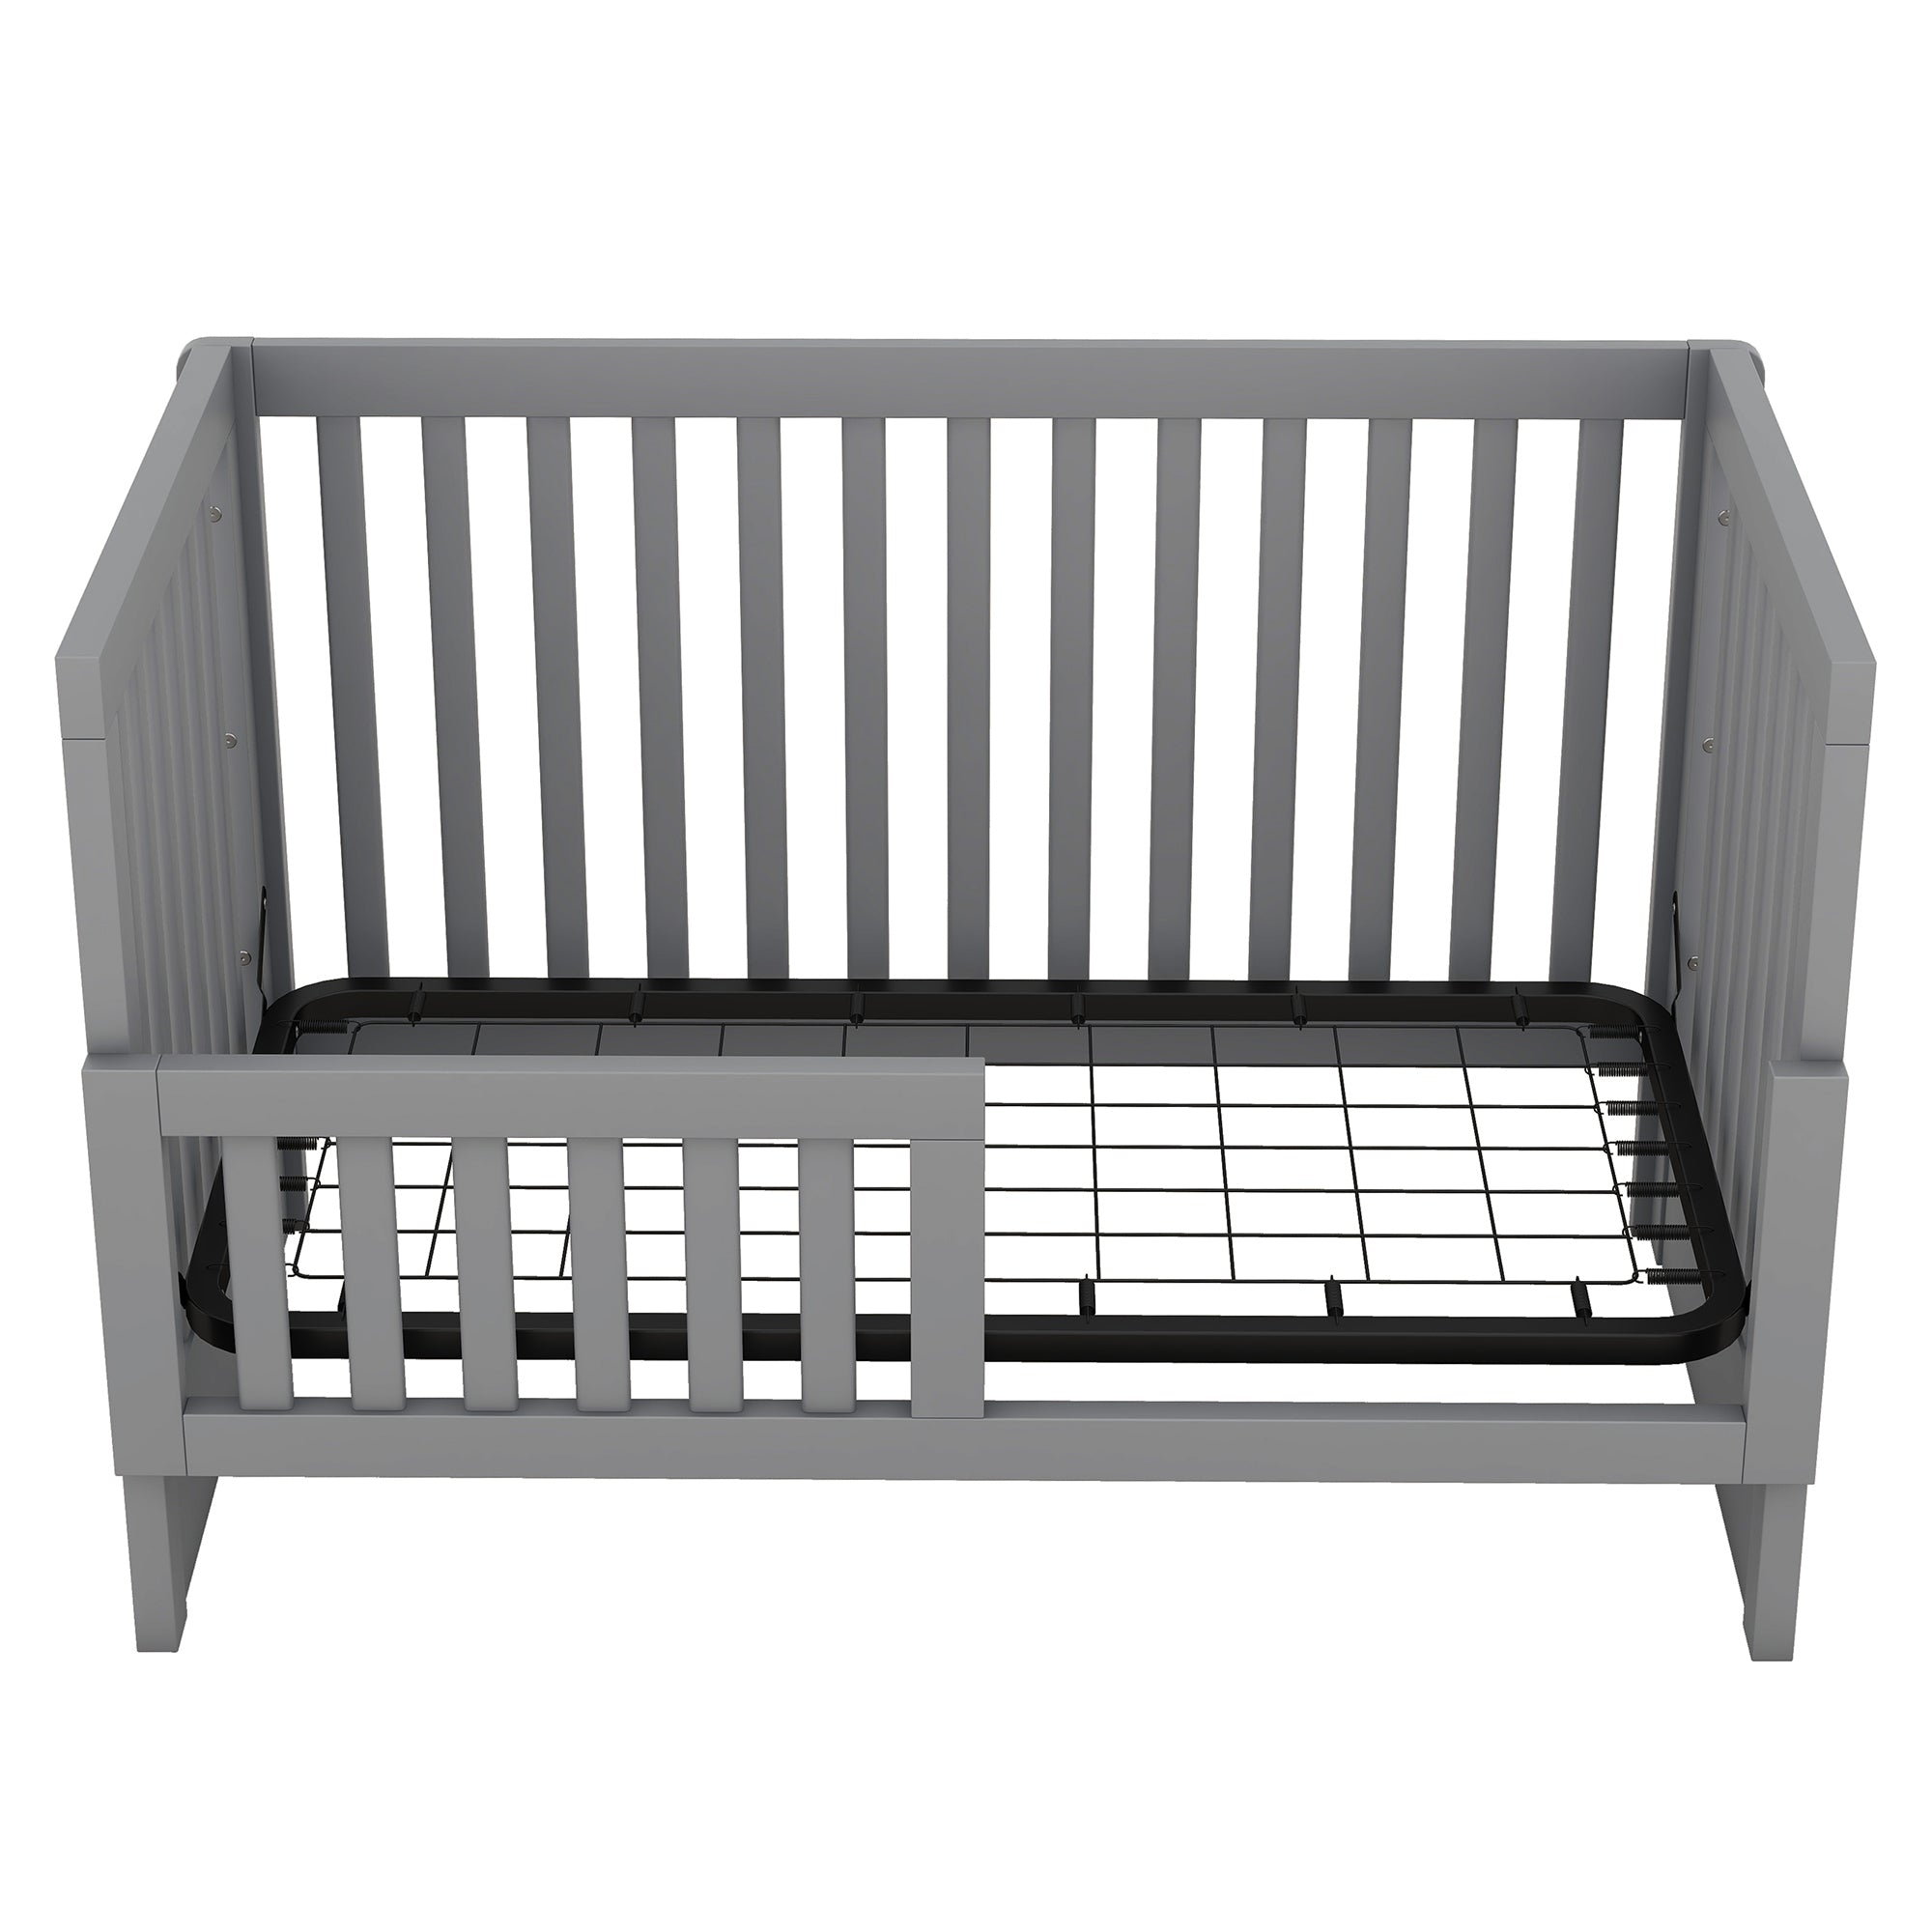 Convertible Crib/Full Size Bed with Changing Table - Gray